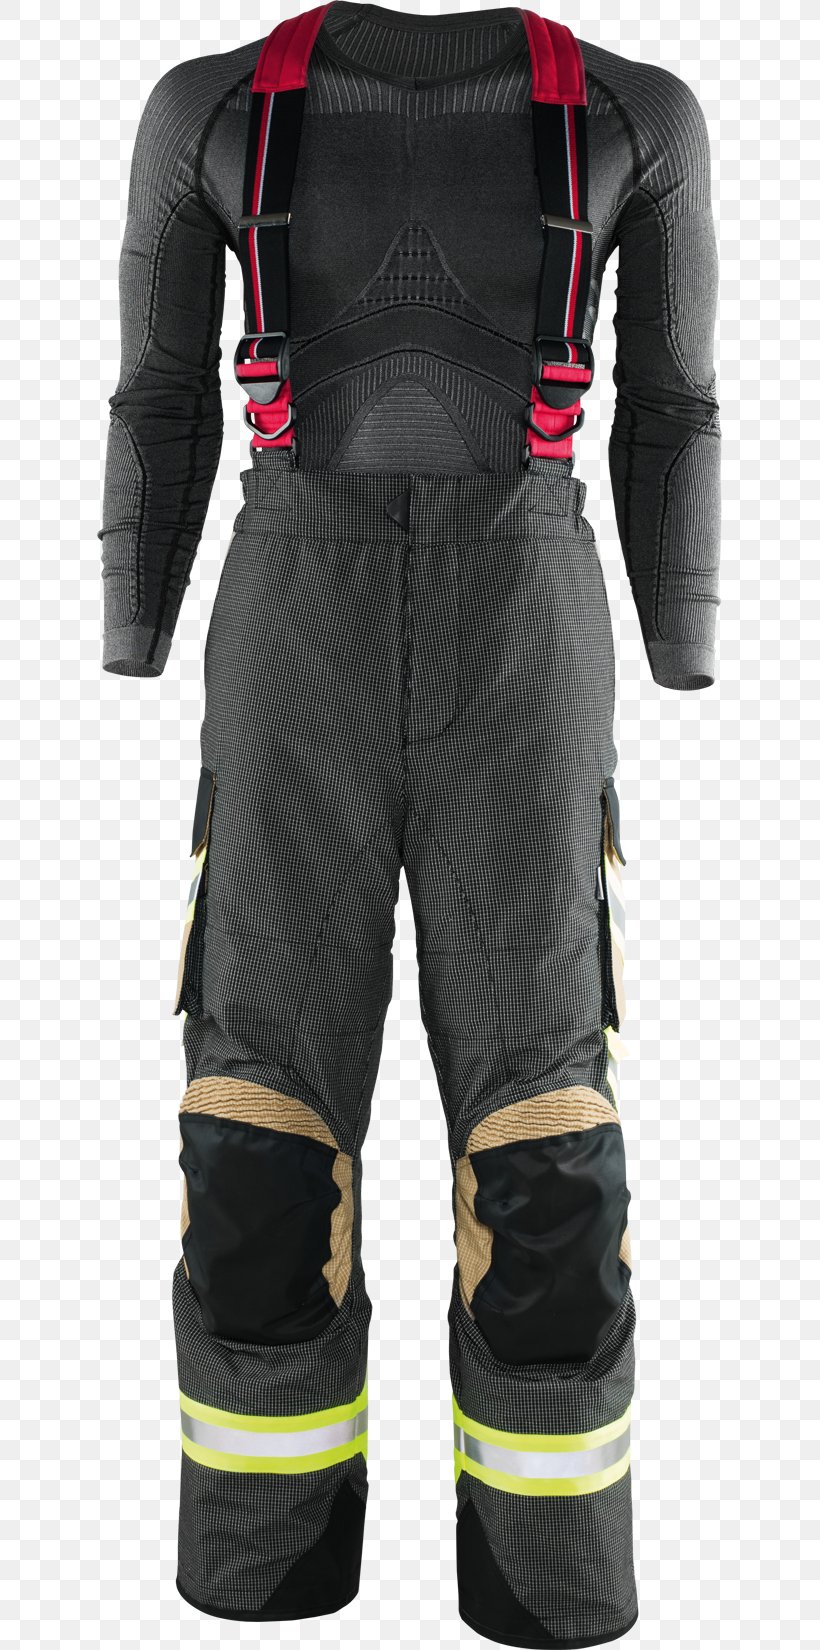 Firefighter Fire Department Jacket Clothing, PNG, 625x1650px, Firefighter, Clothing, En 469, Fire, Fire Department Download Free